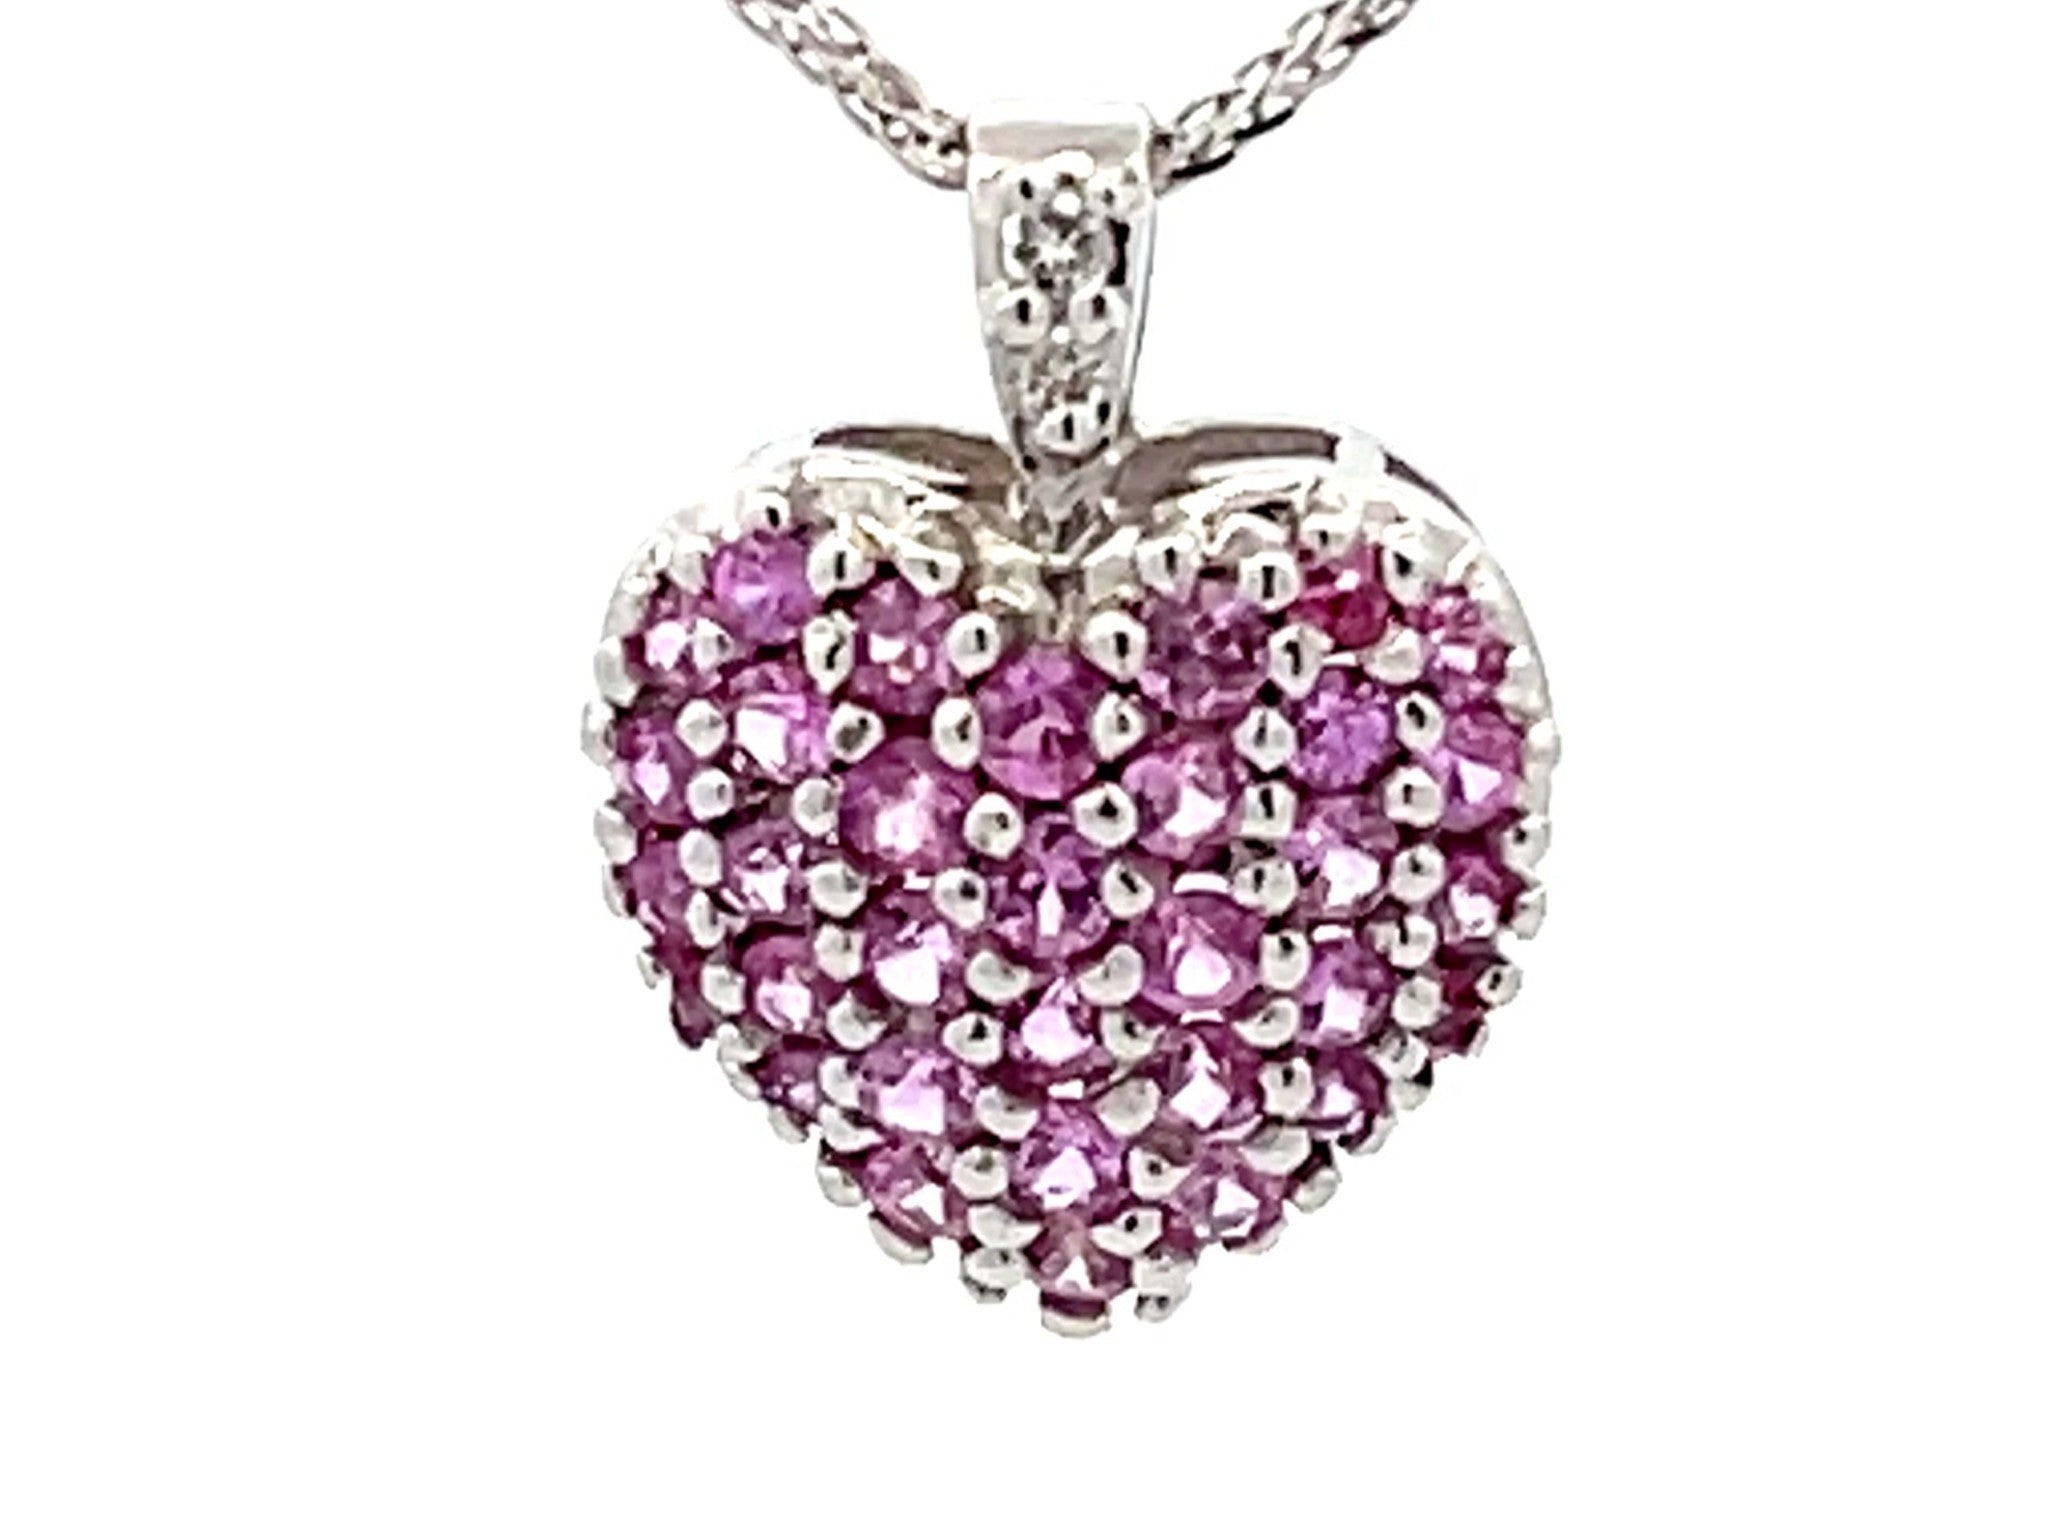 Pink Topaz and Diamond Heart Necklace 14K White Gold